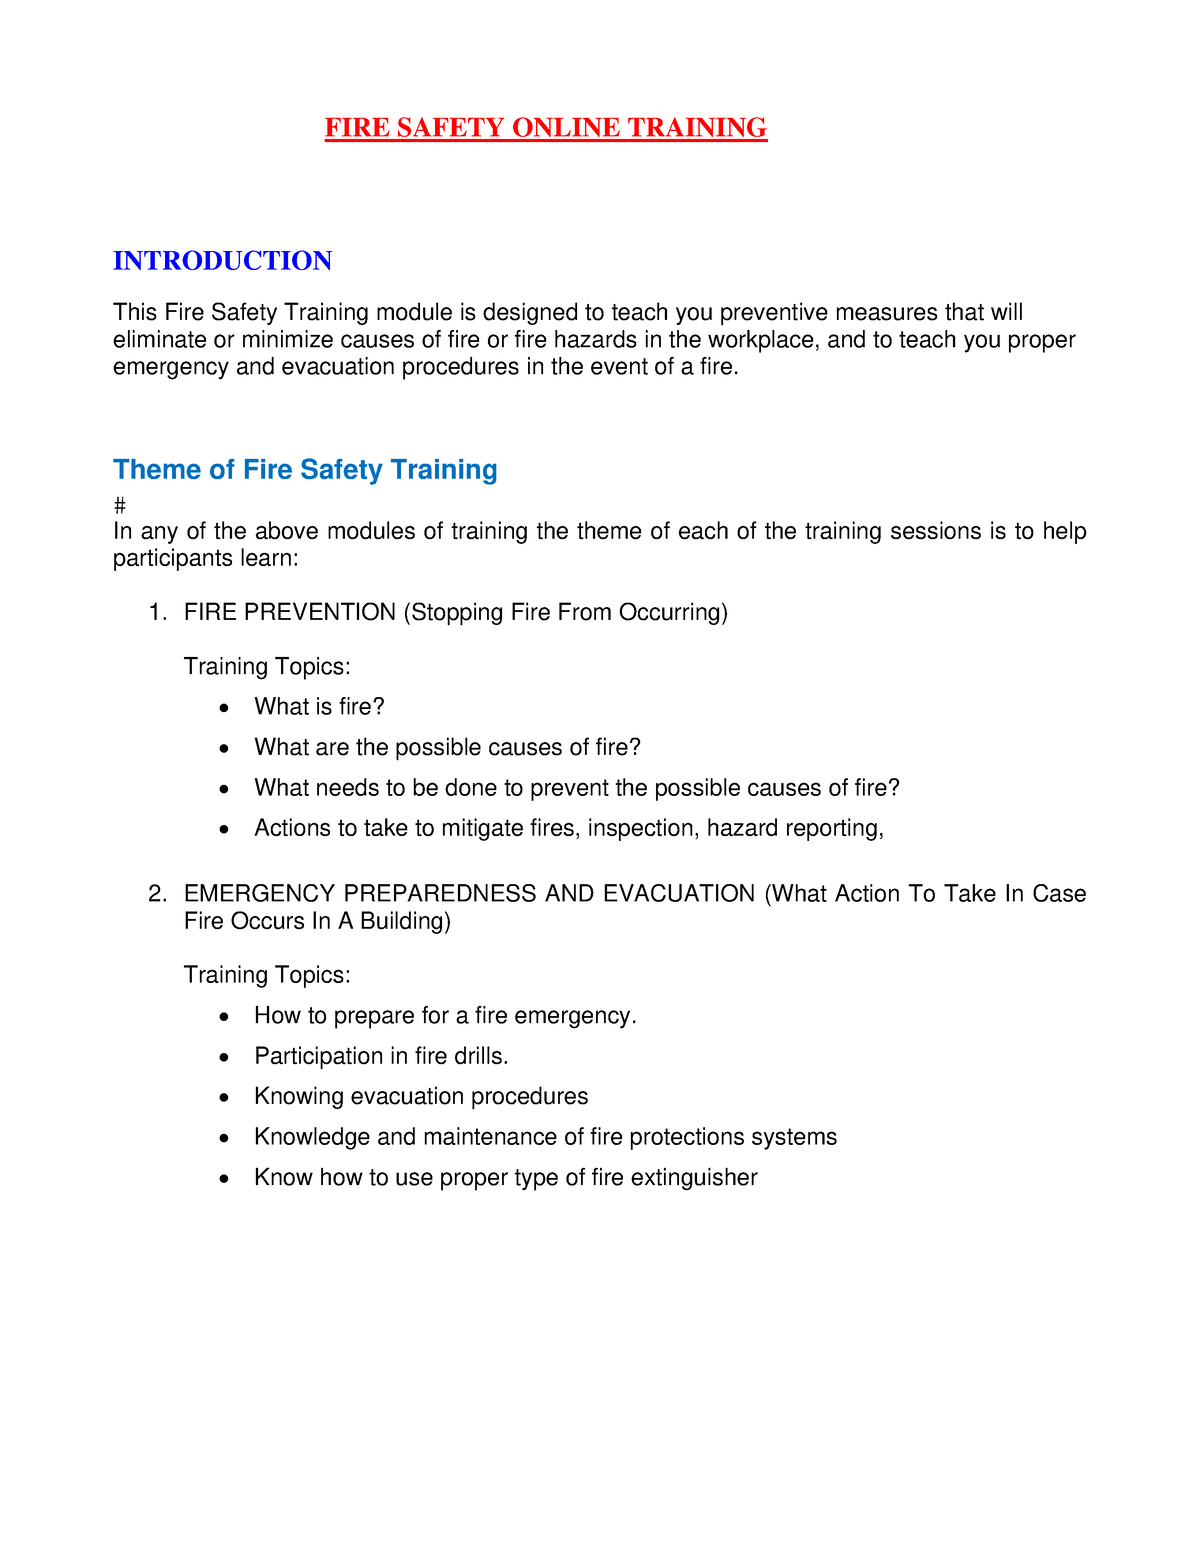 Fire Safety Training Compress Fire Safety Online Training Introduction This Fire Safety 